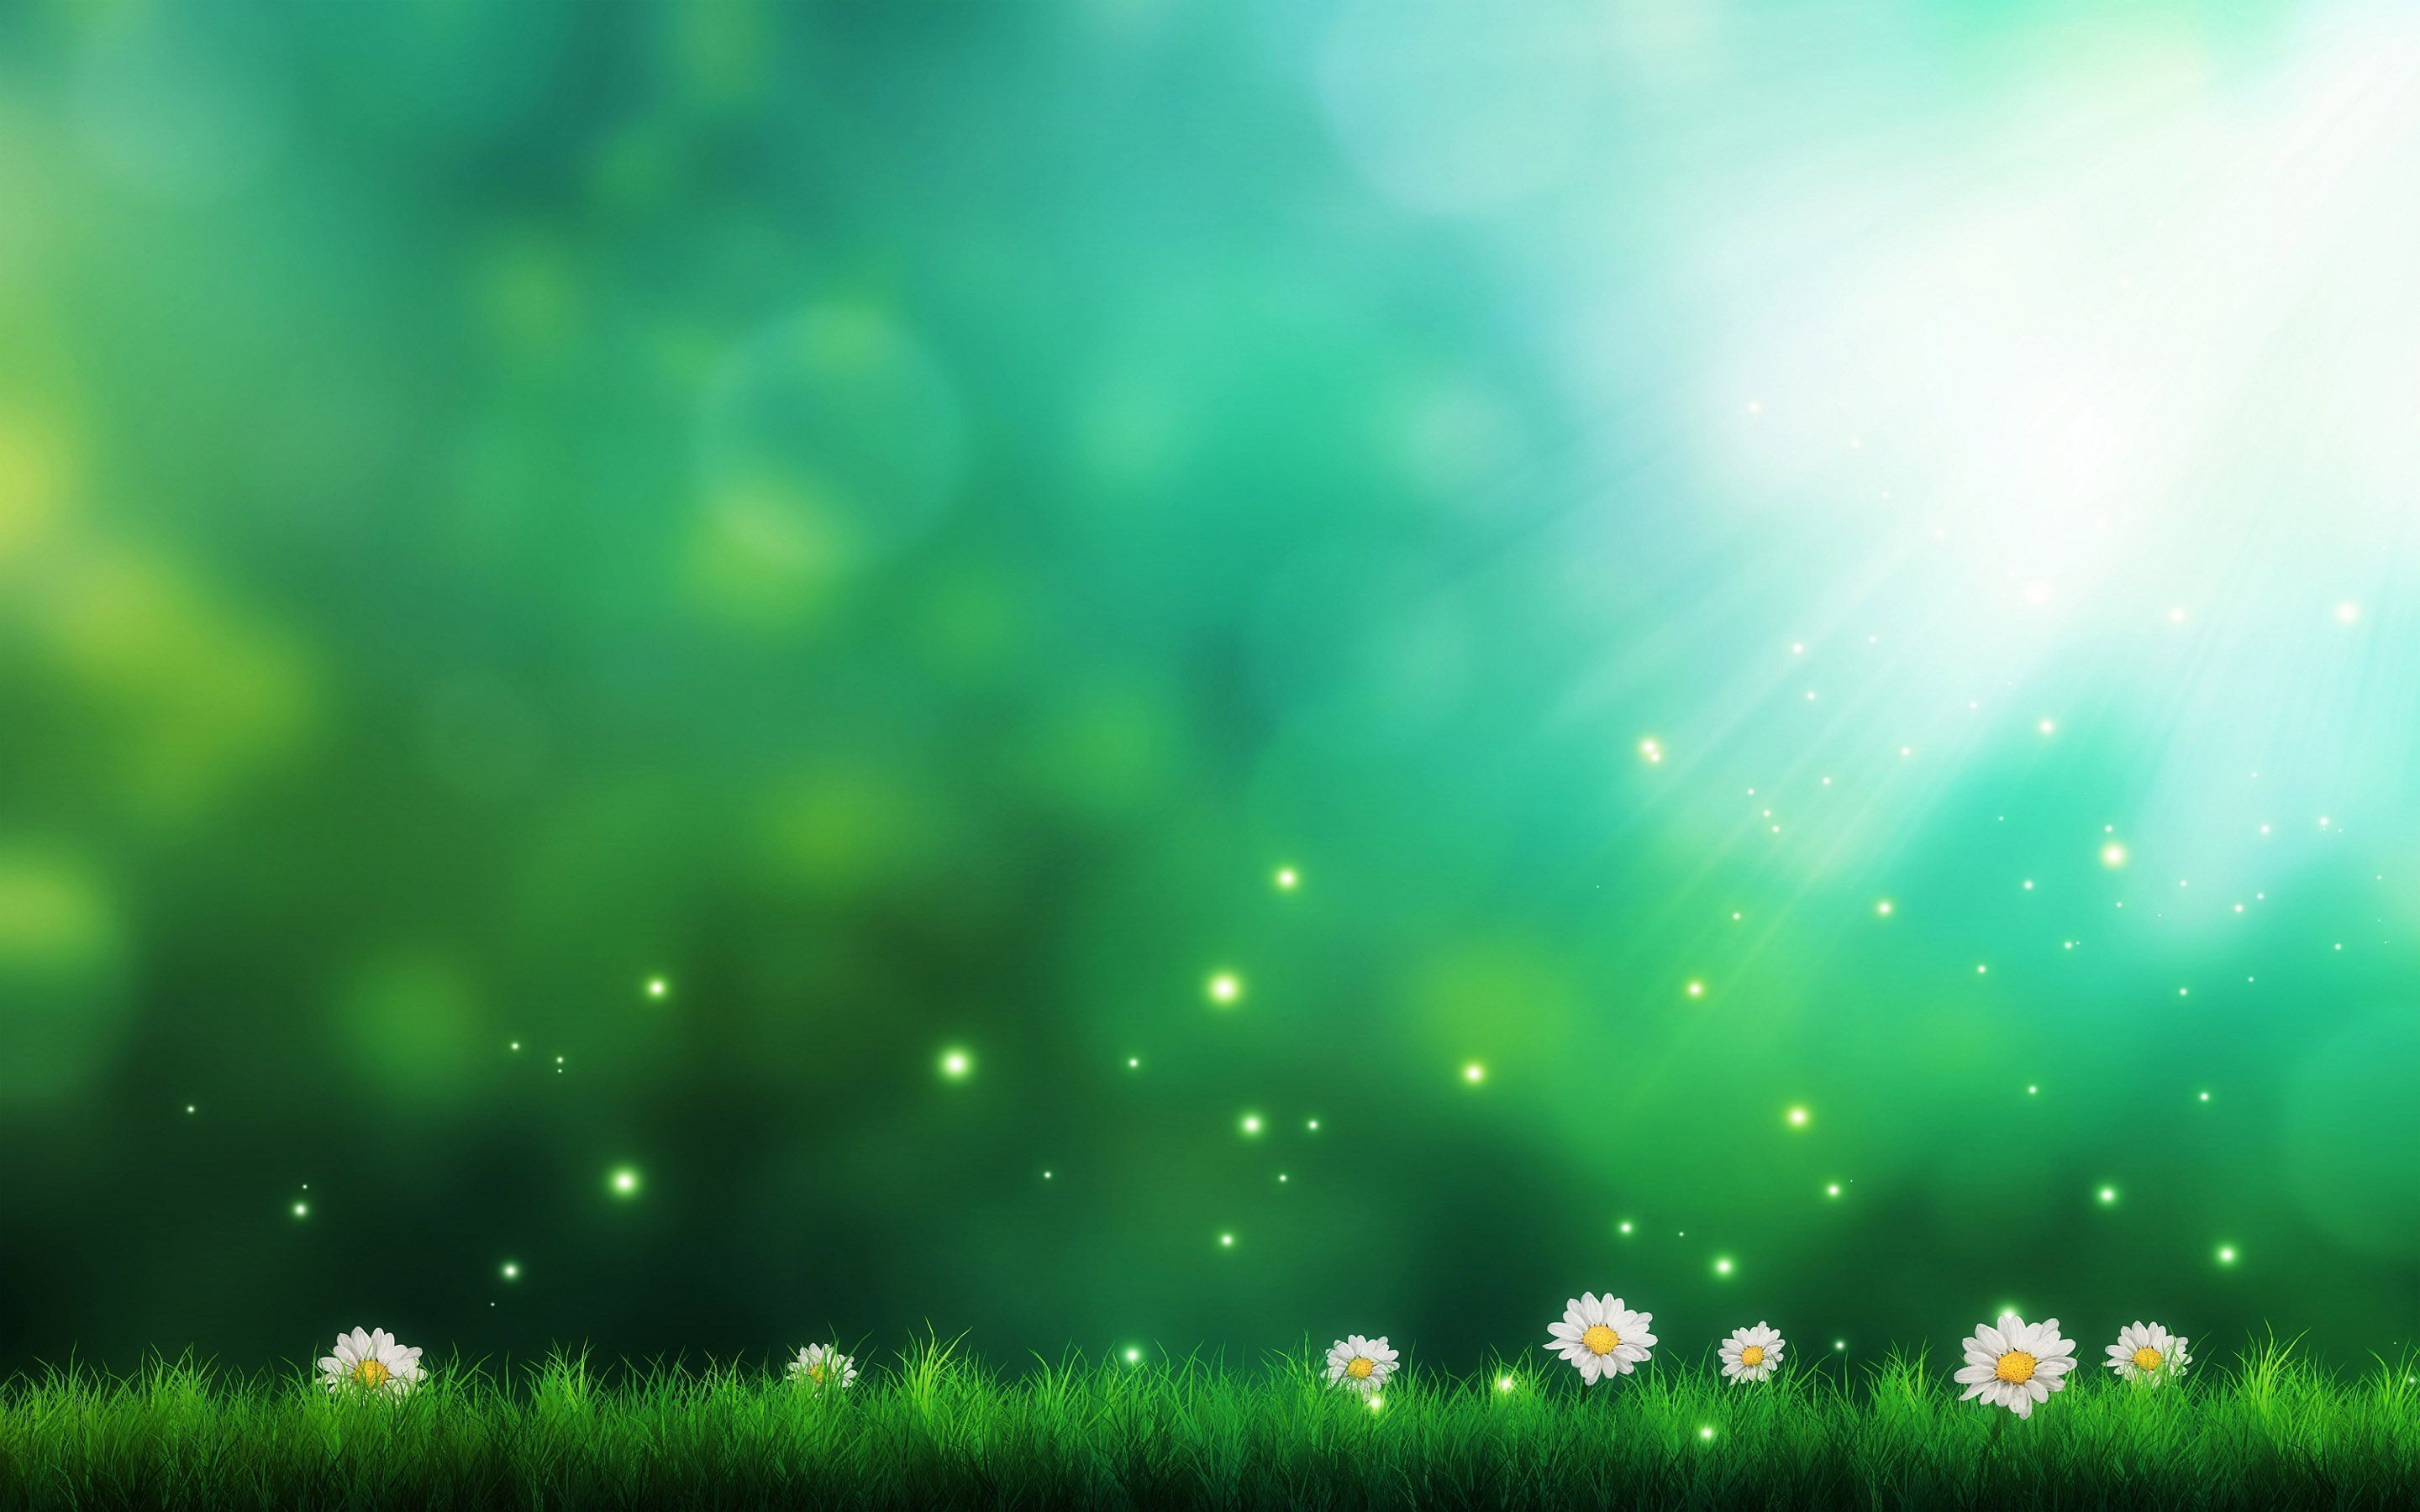 Cool-Green-Background-Picture-Wallpaper.jpg